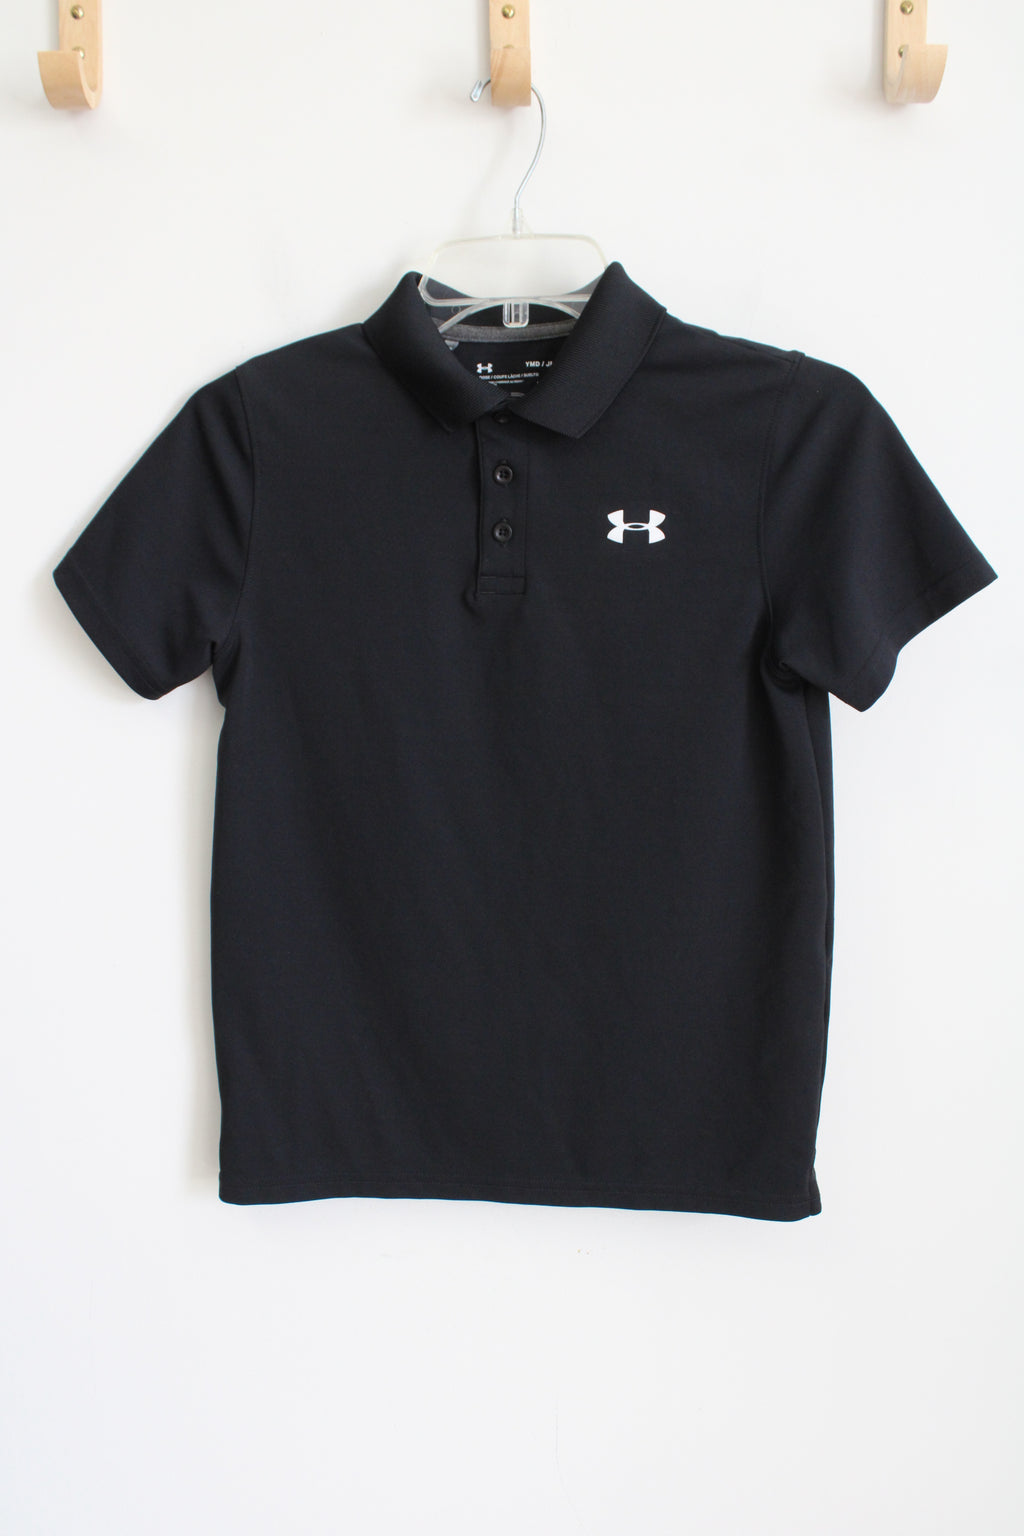 Under Armour Black Polo Shirt | Youth M (10/12)